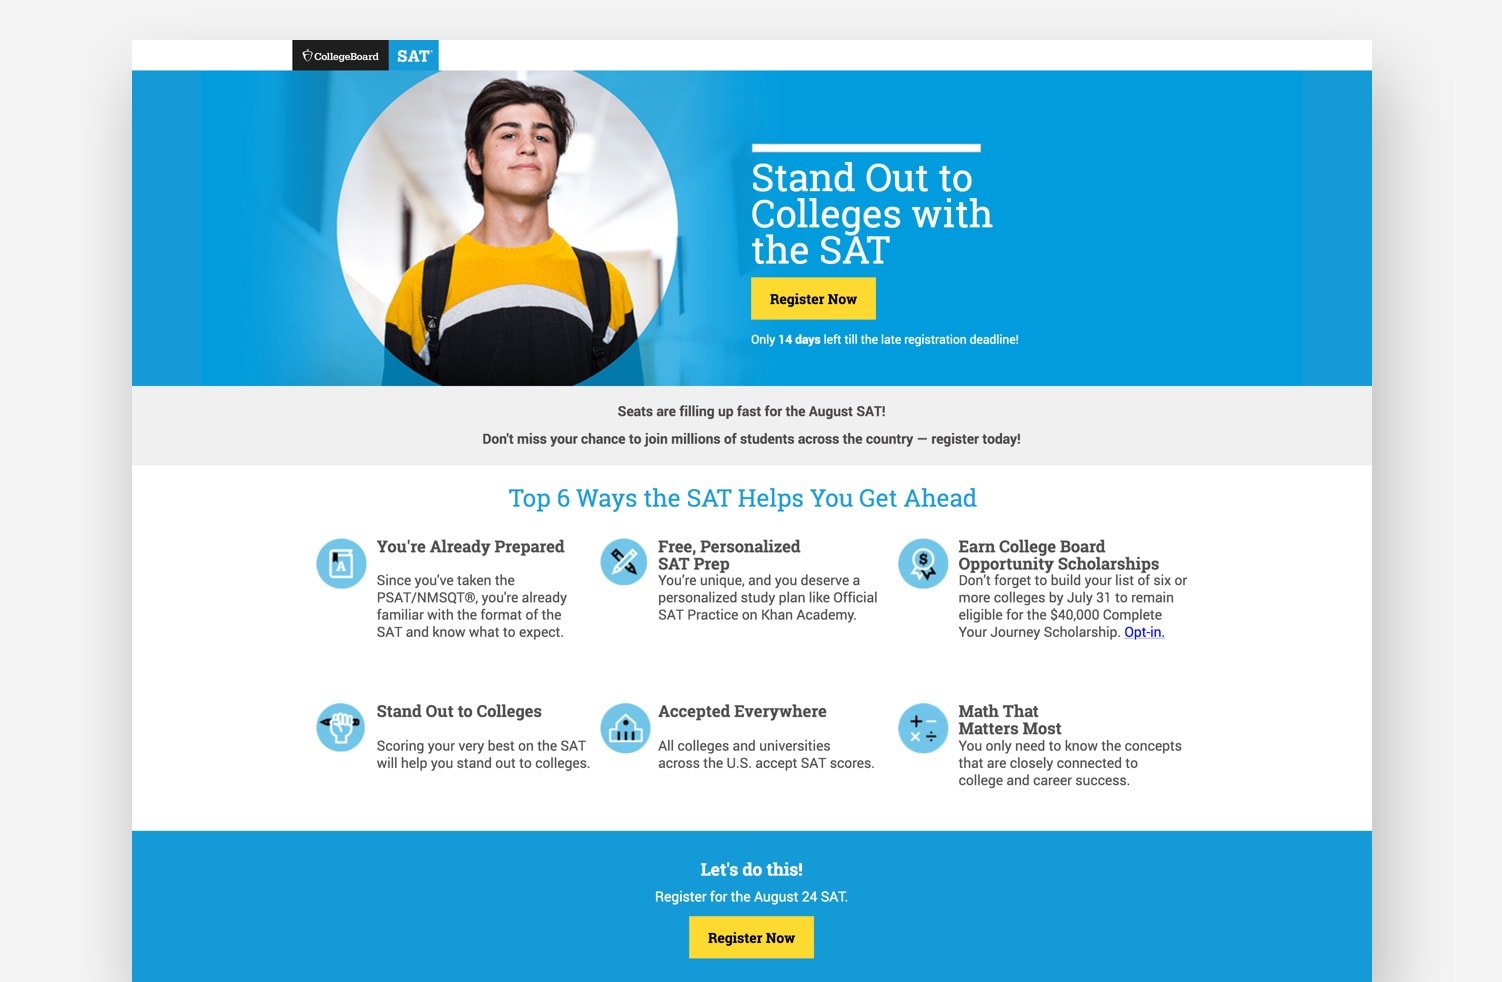 High-Converting Landing Page: College Board